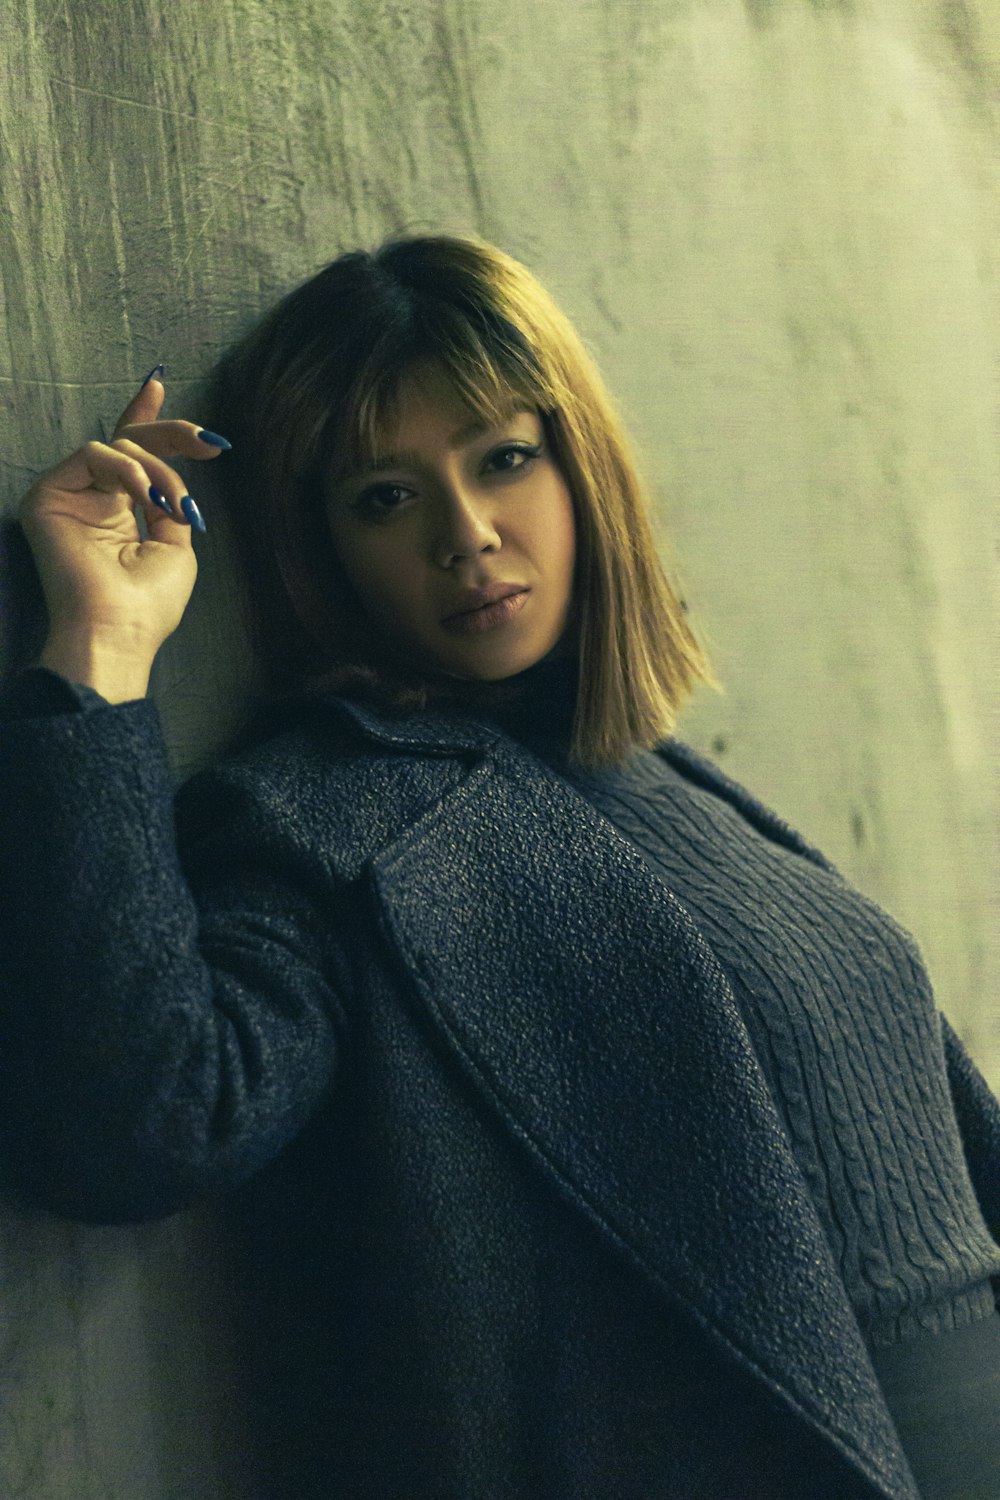 a woman leaning against a wall with a cigarette in her hand